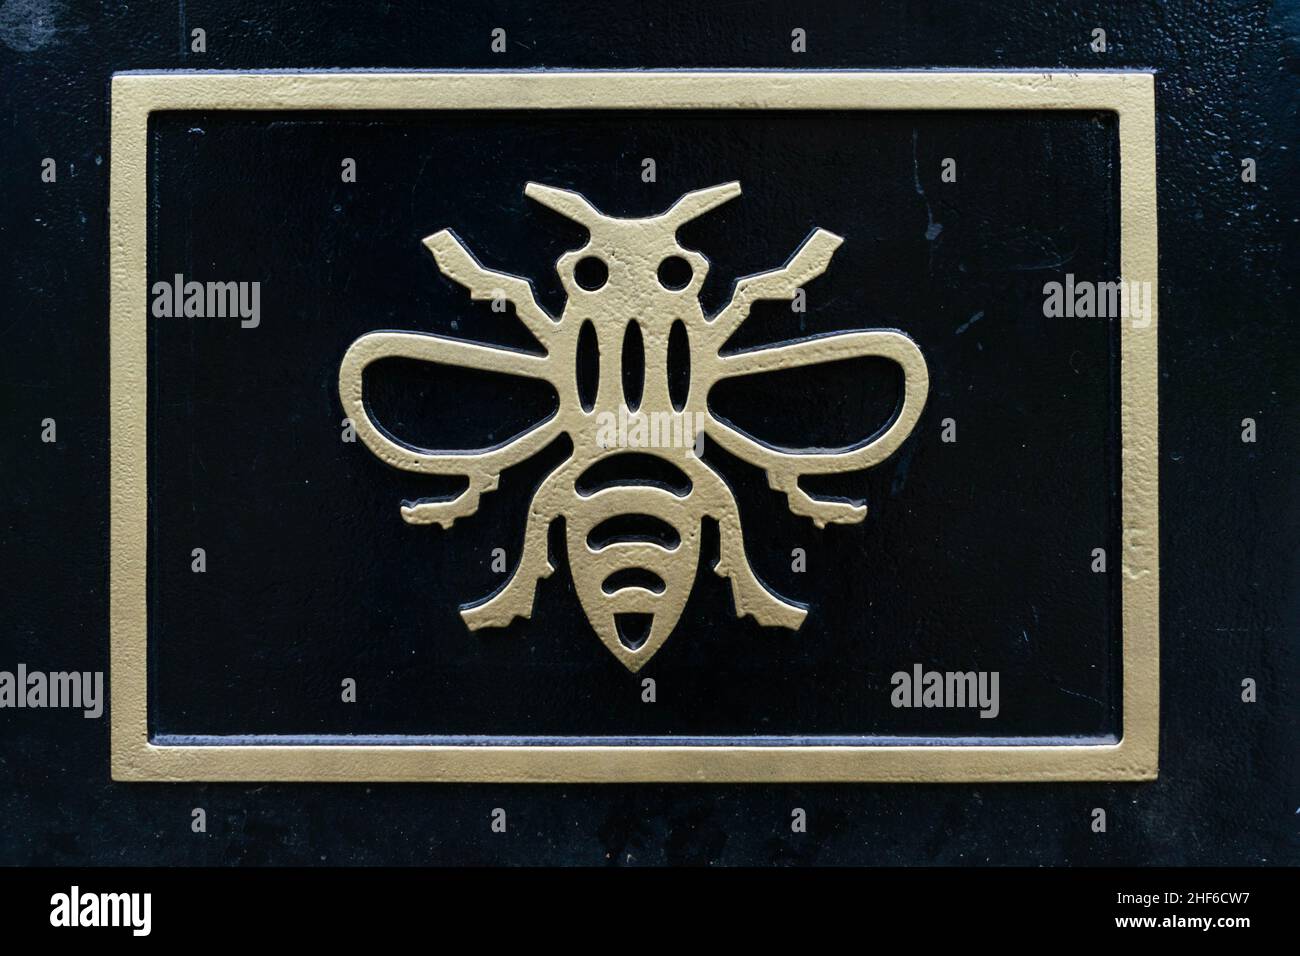 The Manchester Bee symbolises the city being a hive of activity. After the terrorist attack at Manchester Arena, it has come to represent the amazing Stock Photo